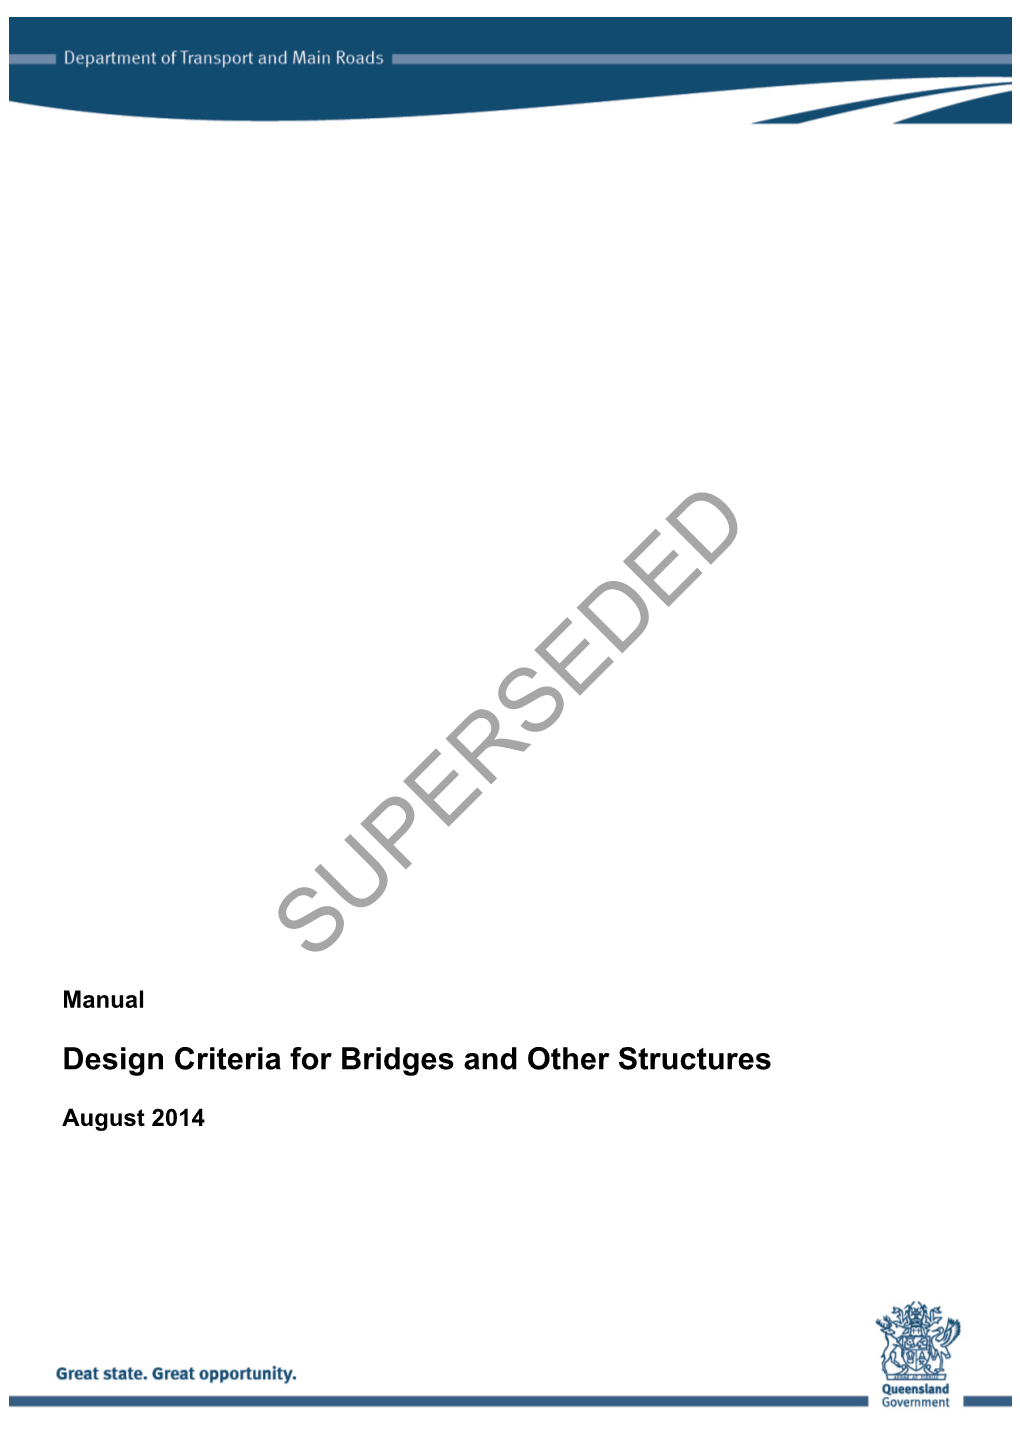 Design Criteria for Bridges and Other Structures